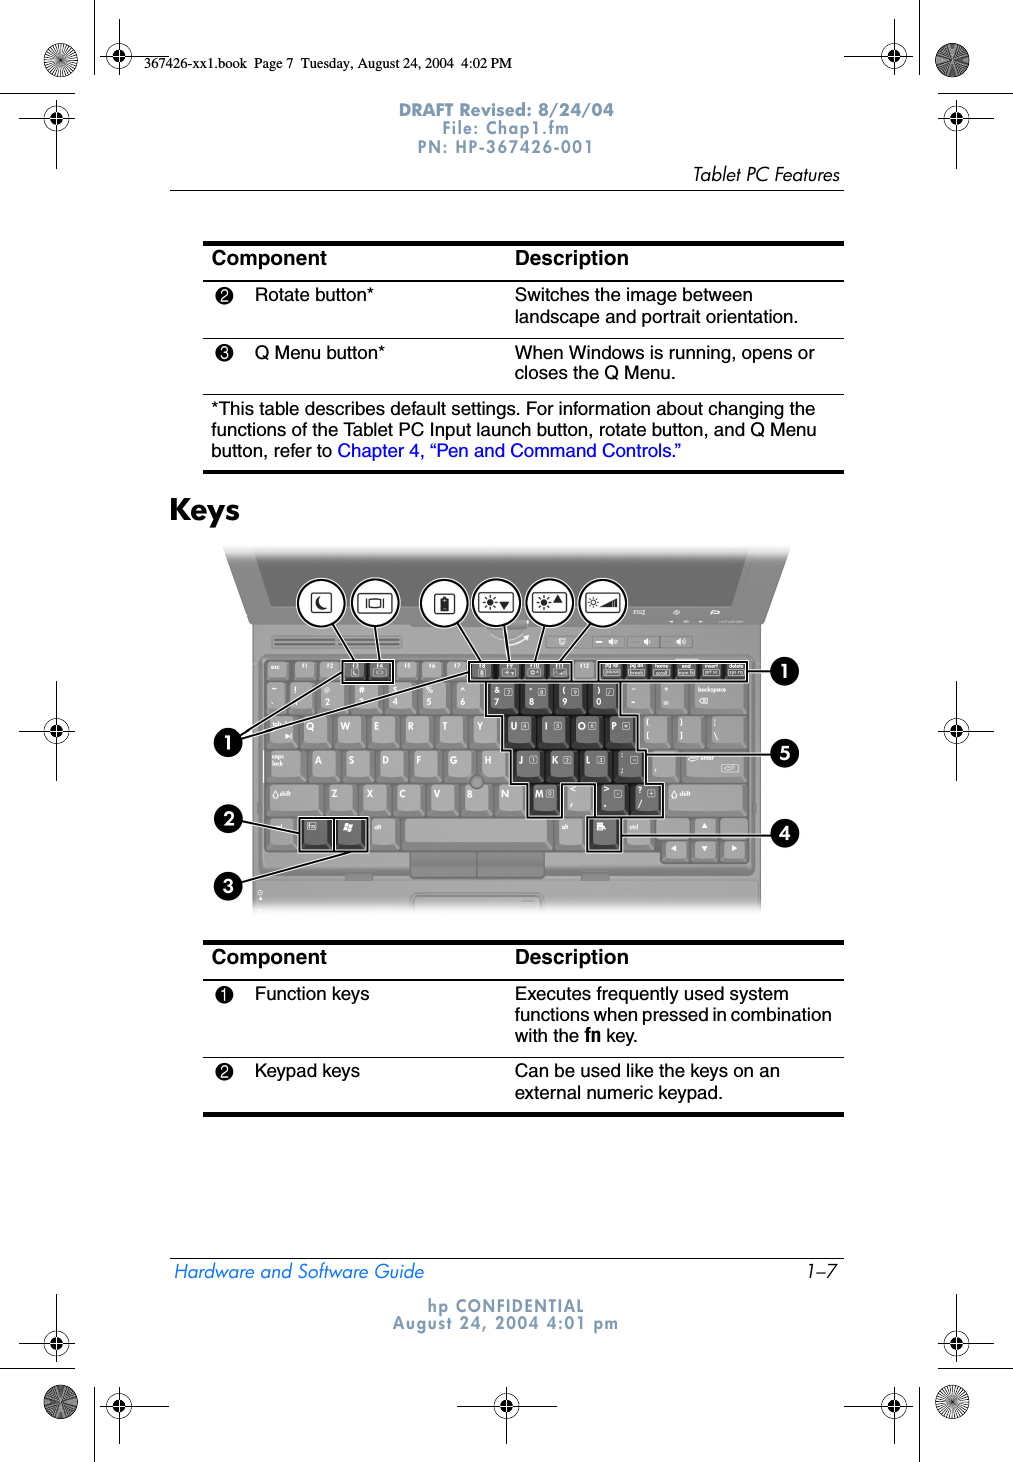 Tablet PC FeaturesHardware and Software Guide 1–7DRAFT Revised: 8/24/04File: Chap1.fm PN: HP-367426-001 hp CONFIDENTIALAugust 24, 2004 4:01 pmKeys2Rotate button* Switches the image between landscape and portrait orientation.3Q Menu button* When Windows is running, opens or closes the Q Menu.*This table describes default settings. For information about changing the functions of the Tablet PC Input launch button, rotate button, and Q Menu button, refer to Chapter 4, “Pen and Command Controls.”Component DescriptionComponent Description1Function keys Executes frequently used system functions when pressed in combination with the fn key.2Keypad keys Can be used like the keys on an external numeric keypad.367426-xx1.book  Page 7  Tuesday, August 24, 2004  4:02 PM